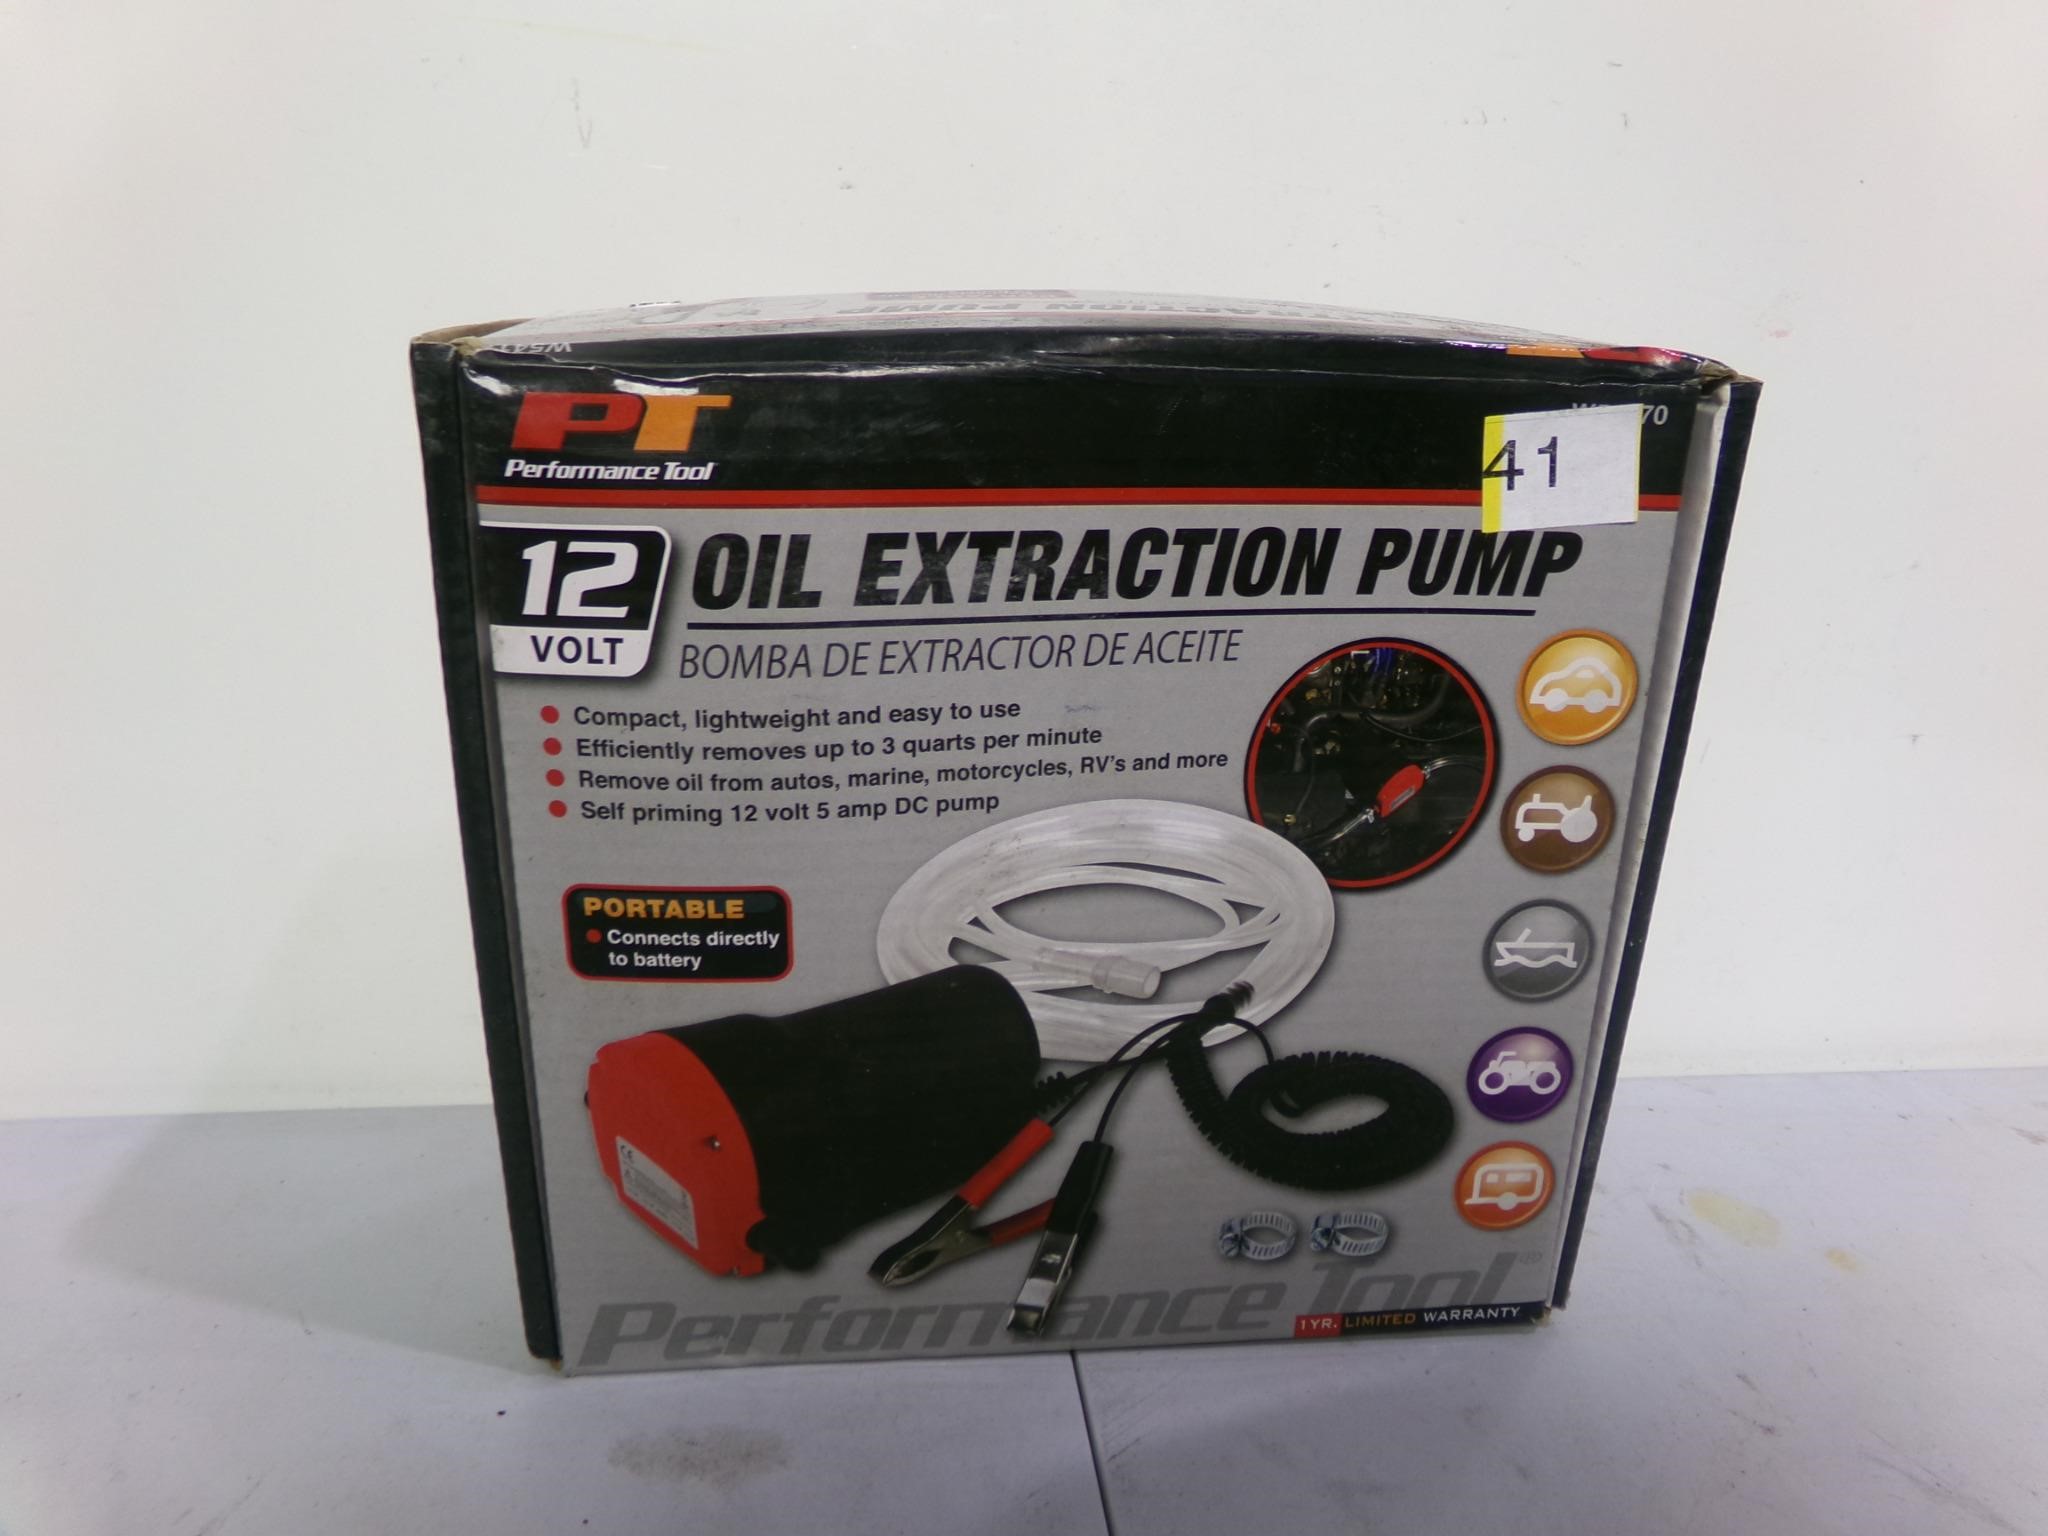 Oil, extraction pump